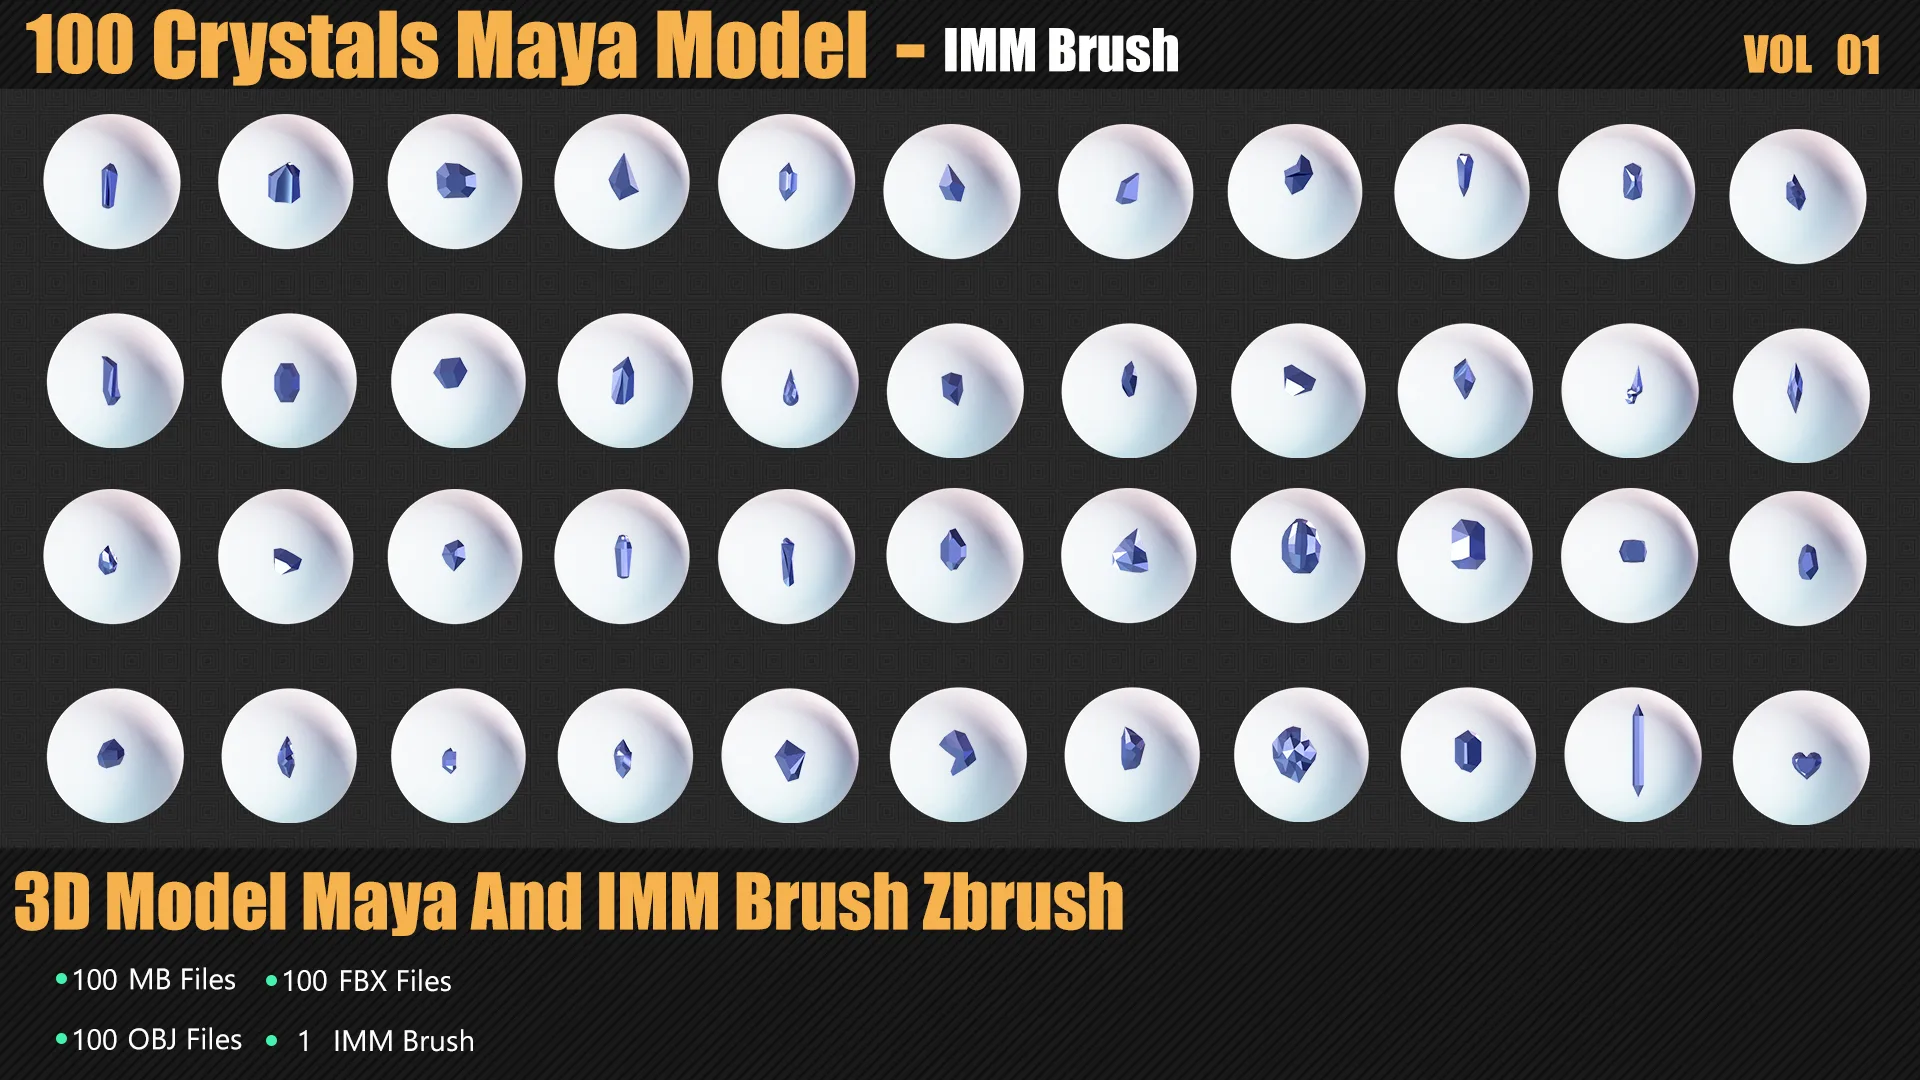 100 Crystals 3D Model And Brush Zbrush